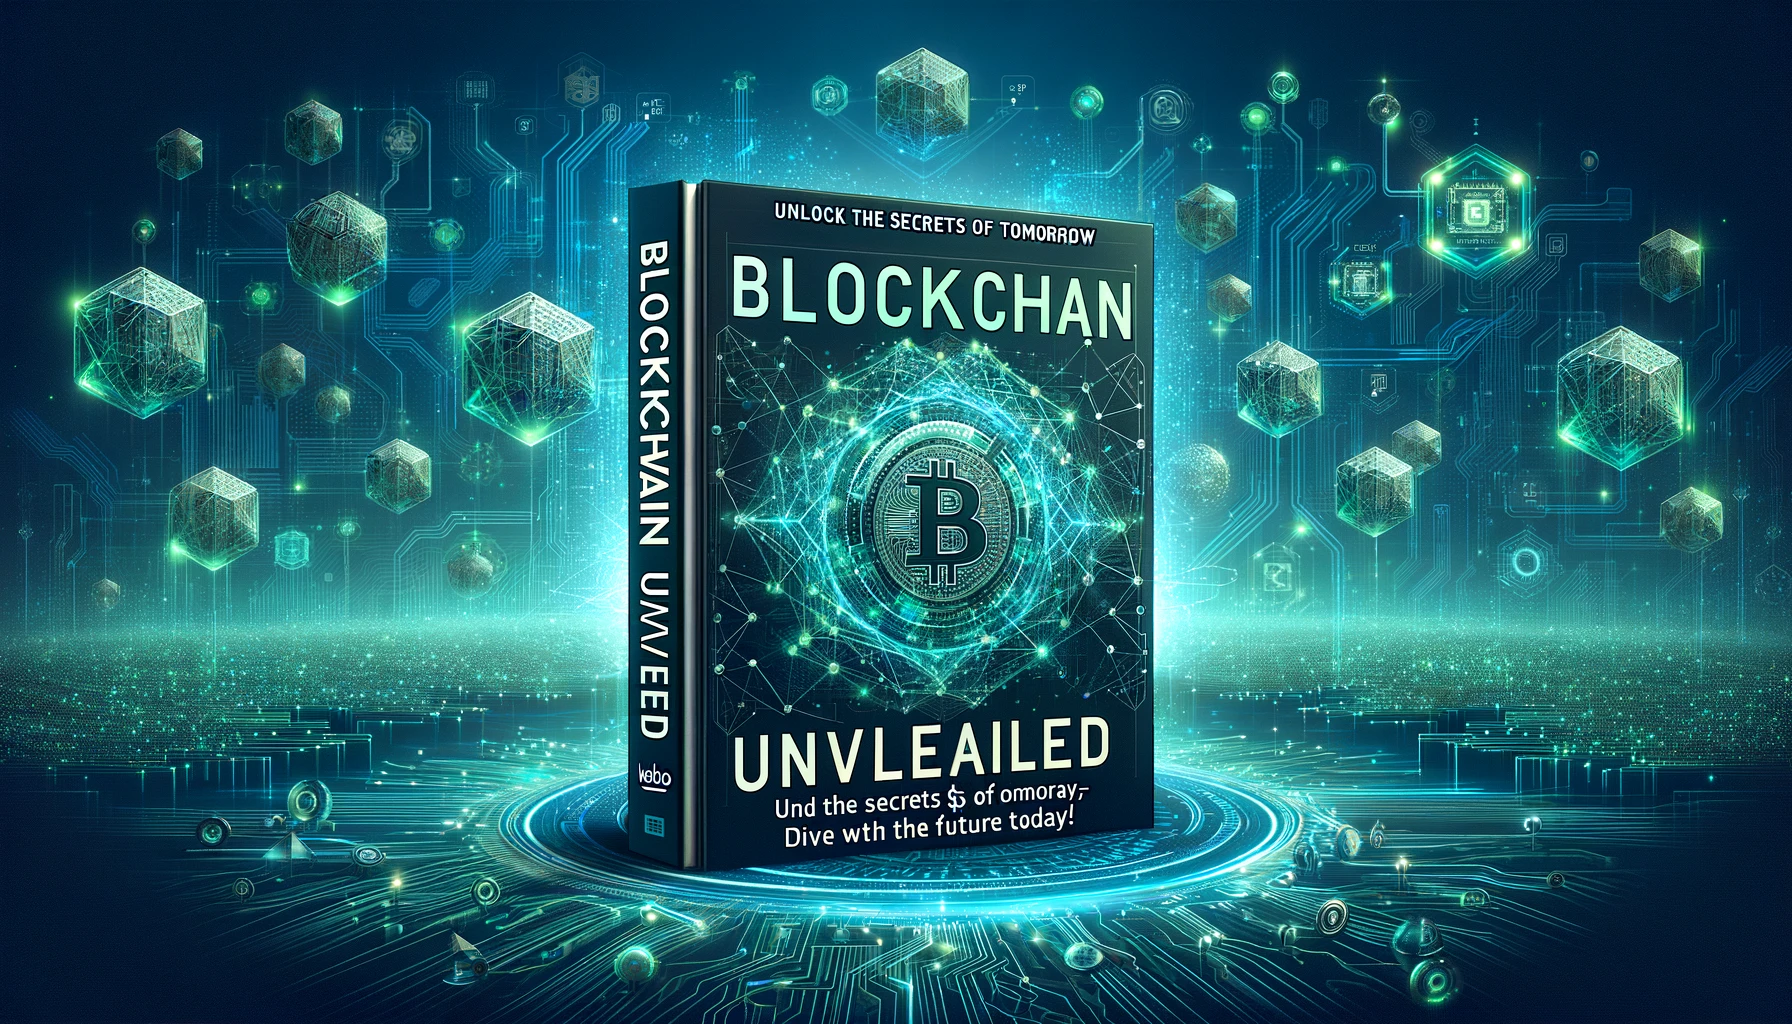 Unlock the secrets of tomorrow with ‘Blockchain Unveiled’—now just $3.99 on Kobo. Dive into the future today!